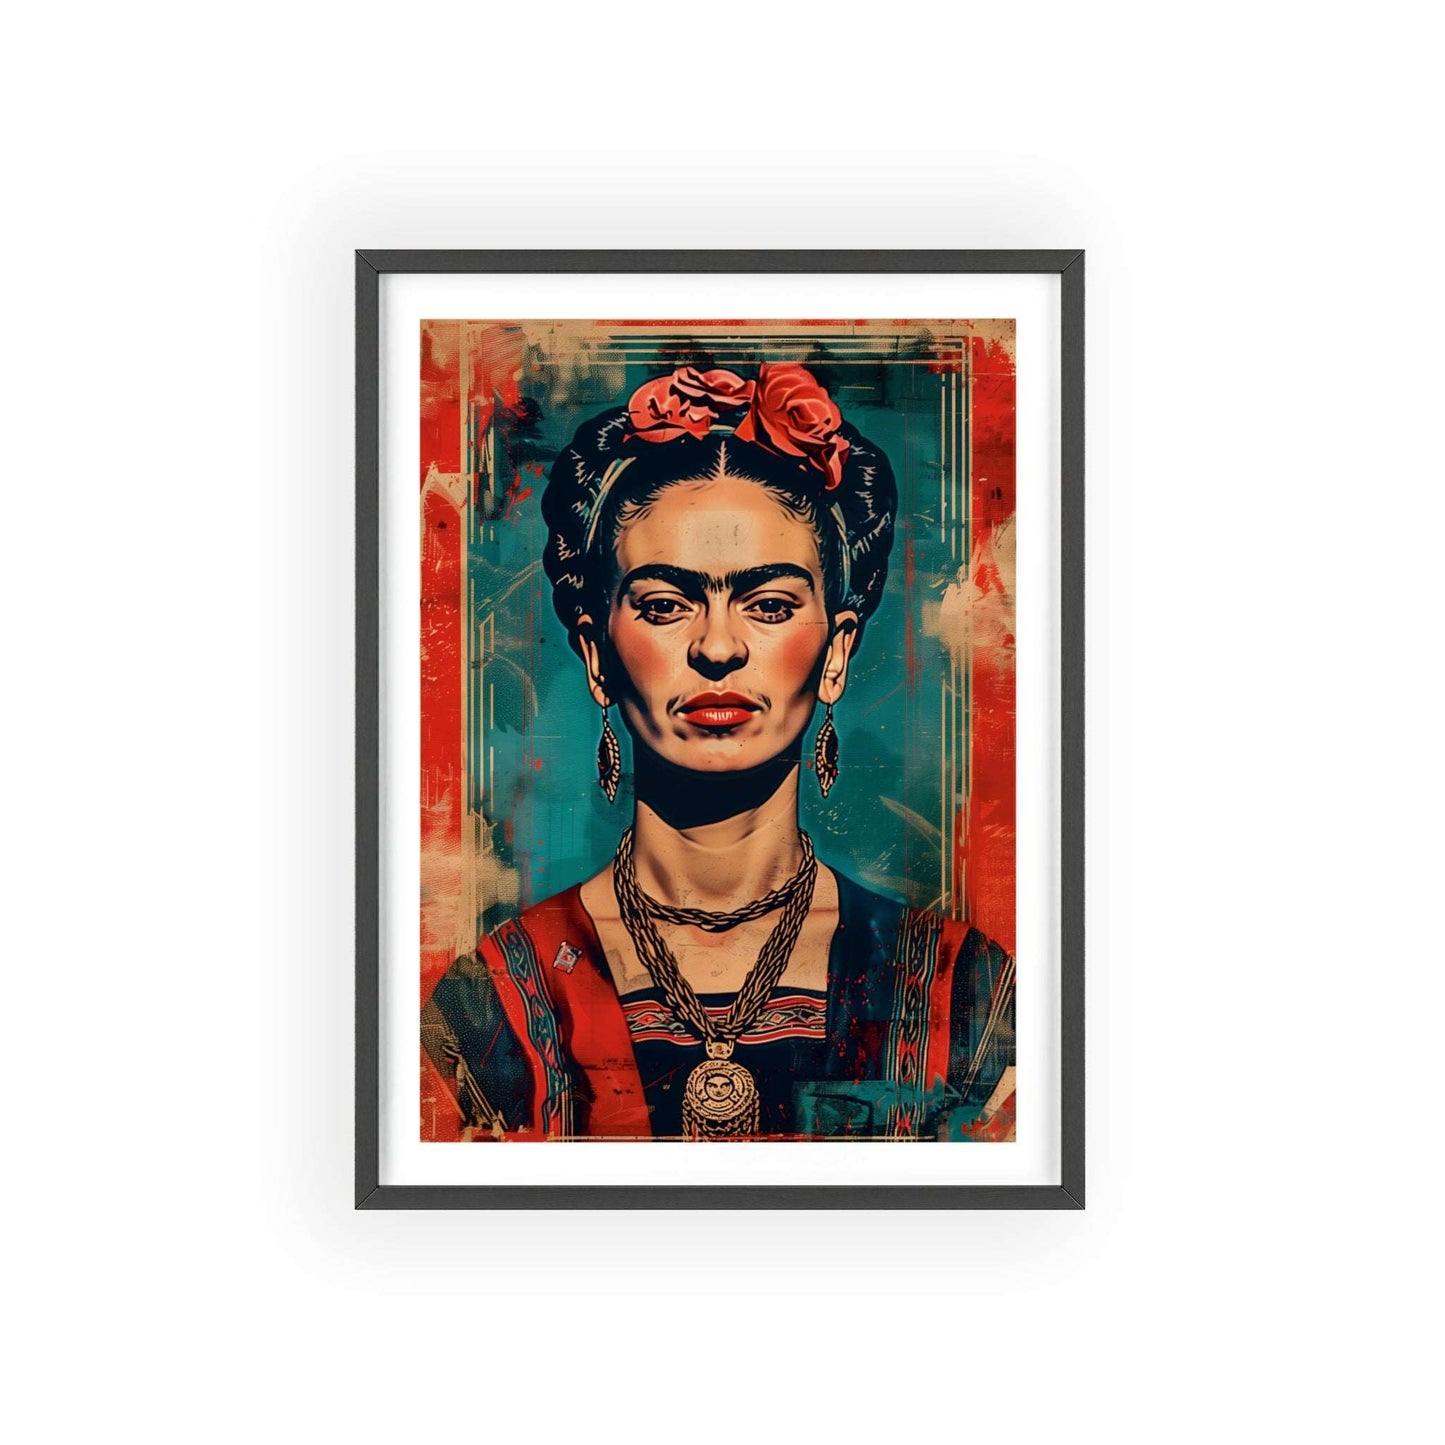 Framed poster featuring a portrait of Frida Kahlo in the style of Shepard Fairey. Frida has red lips, black eyeliner, and wears vibrant traditional Mexican clothing. The background has a distressed vintage texture